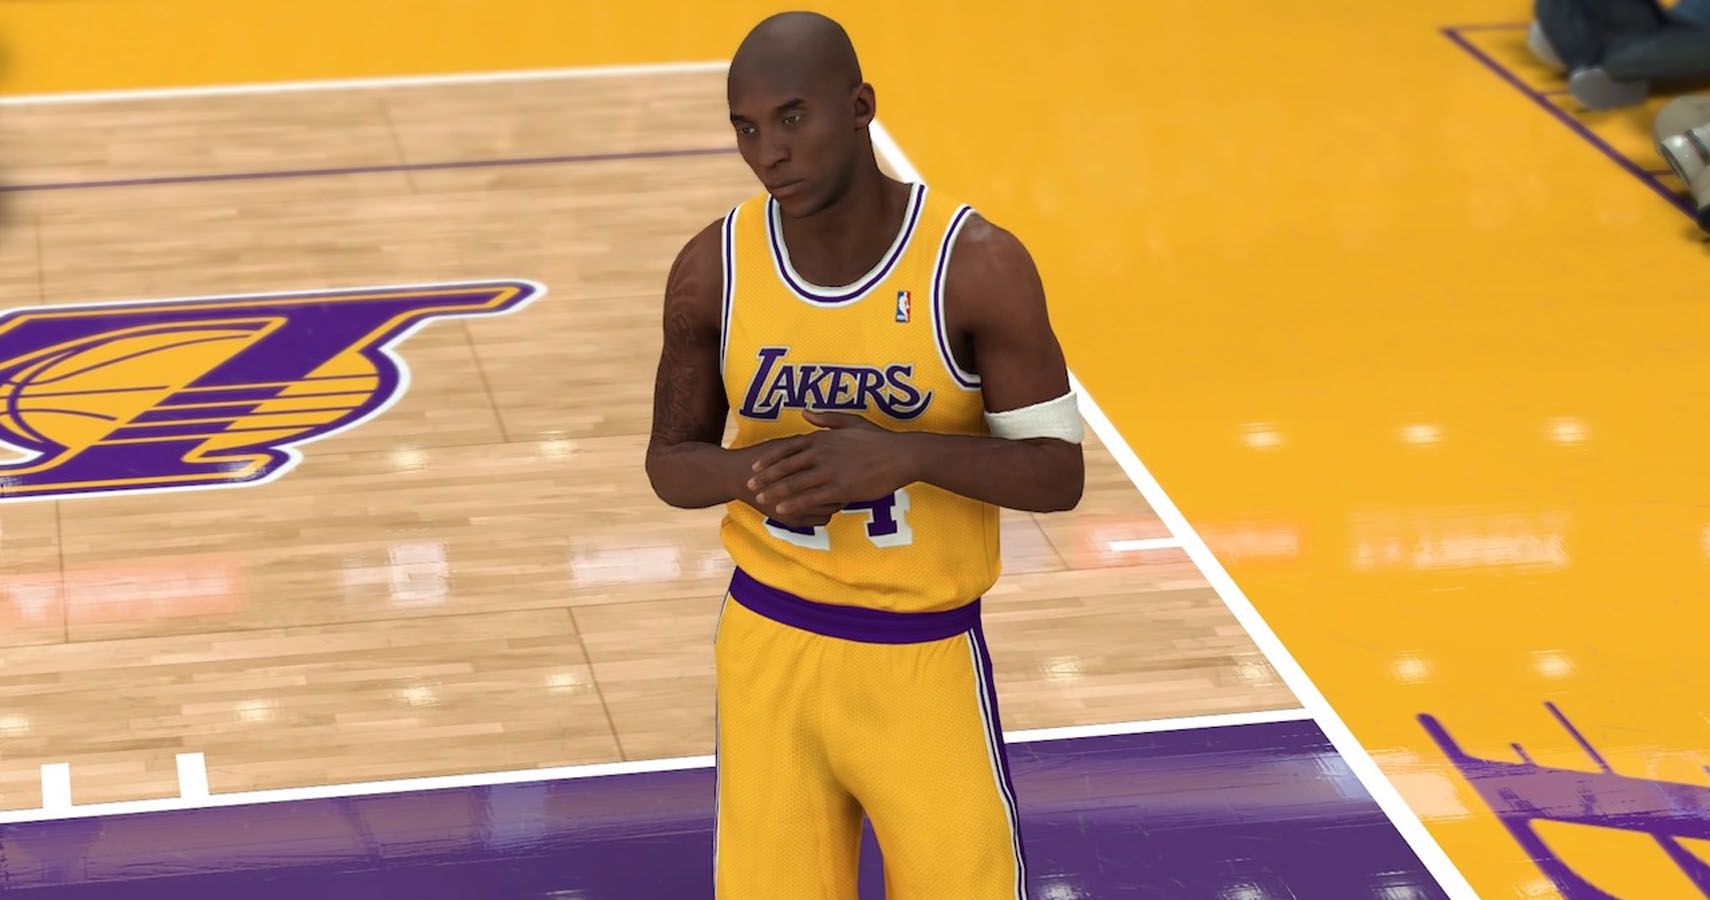 NBA 2K20' Continues To Honor Kobe Bryant With Realistic Lakers